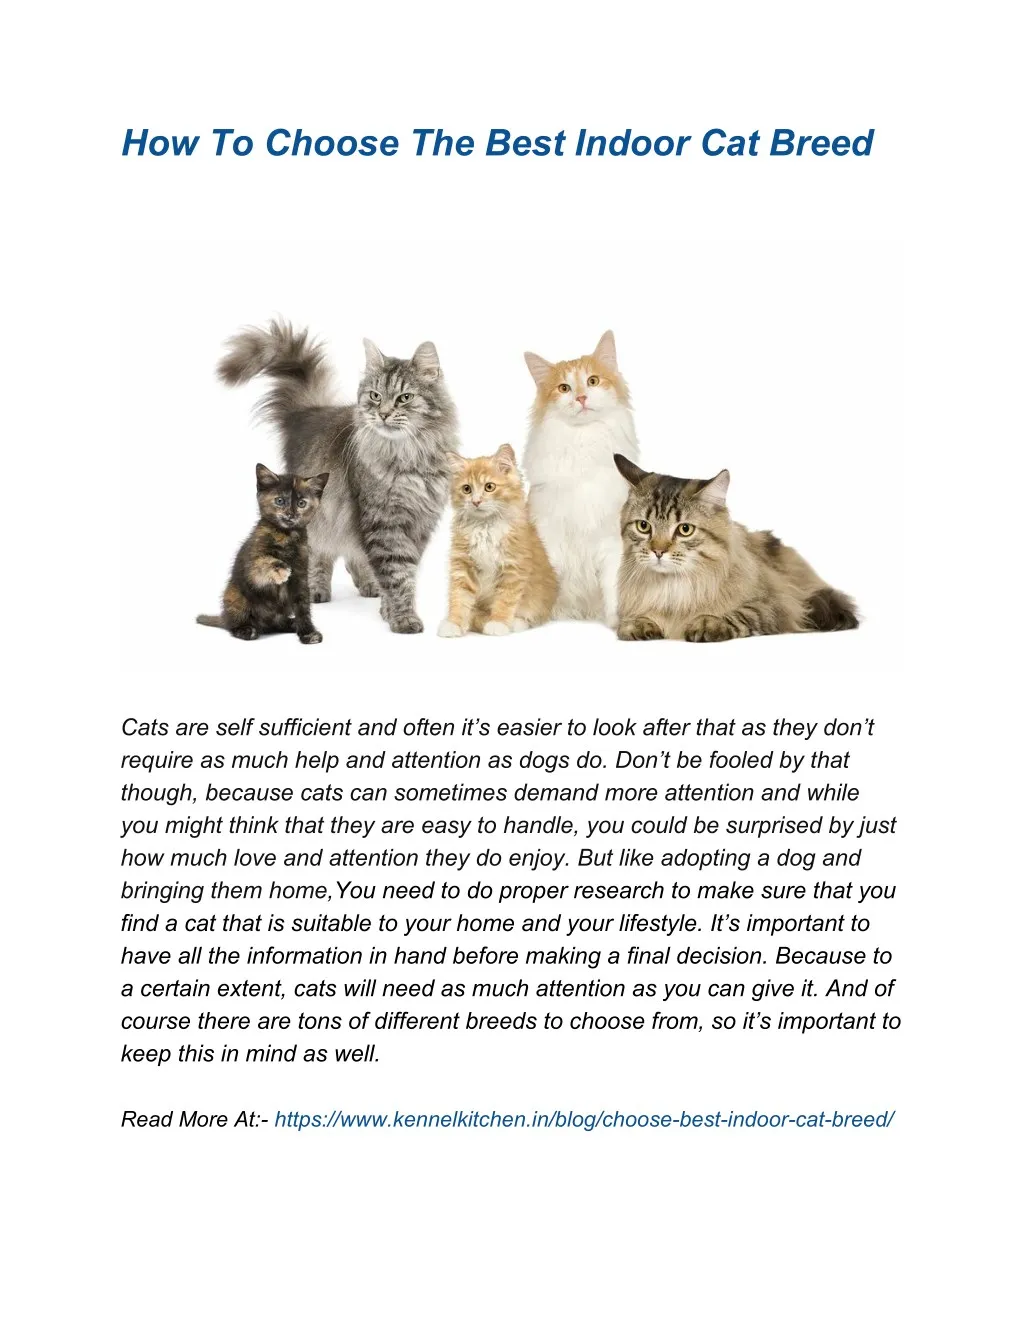 how to choose the best indoor cat breed